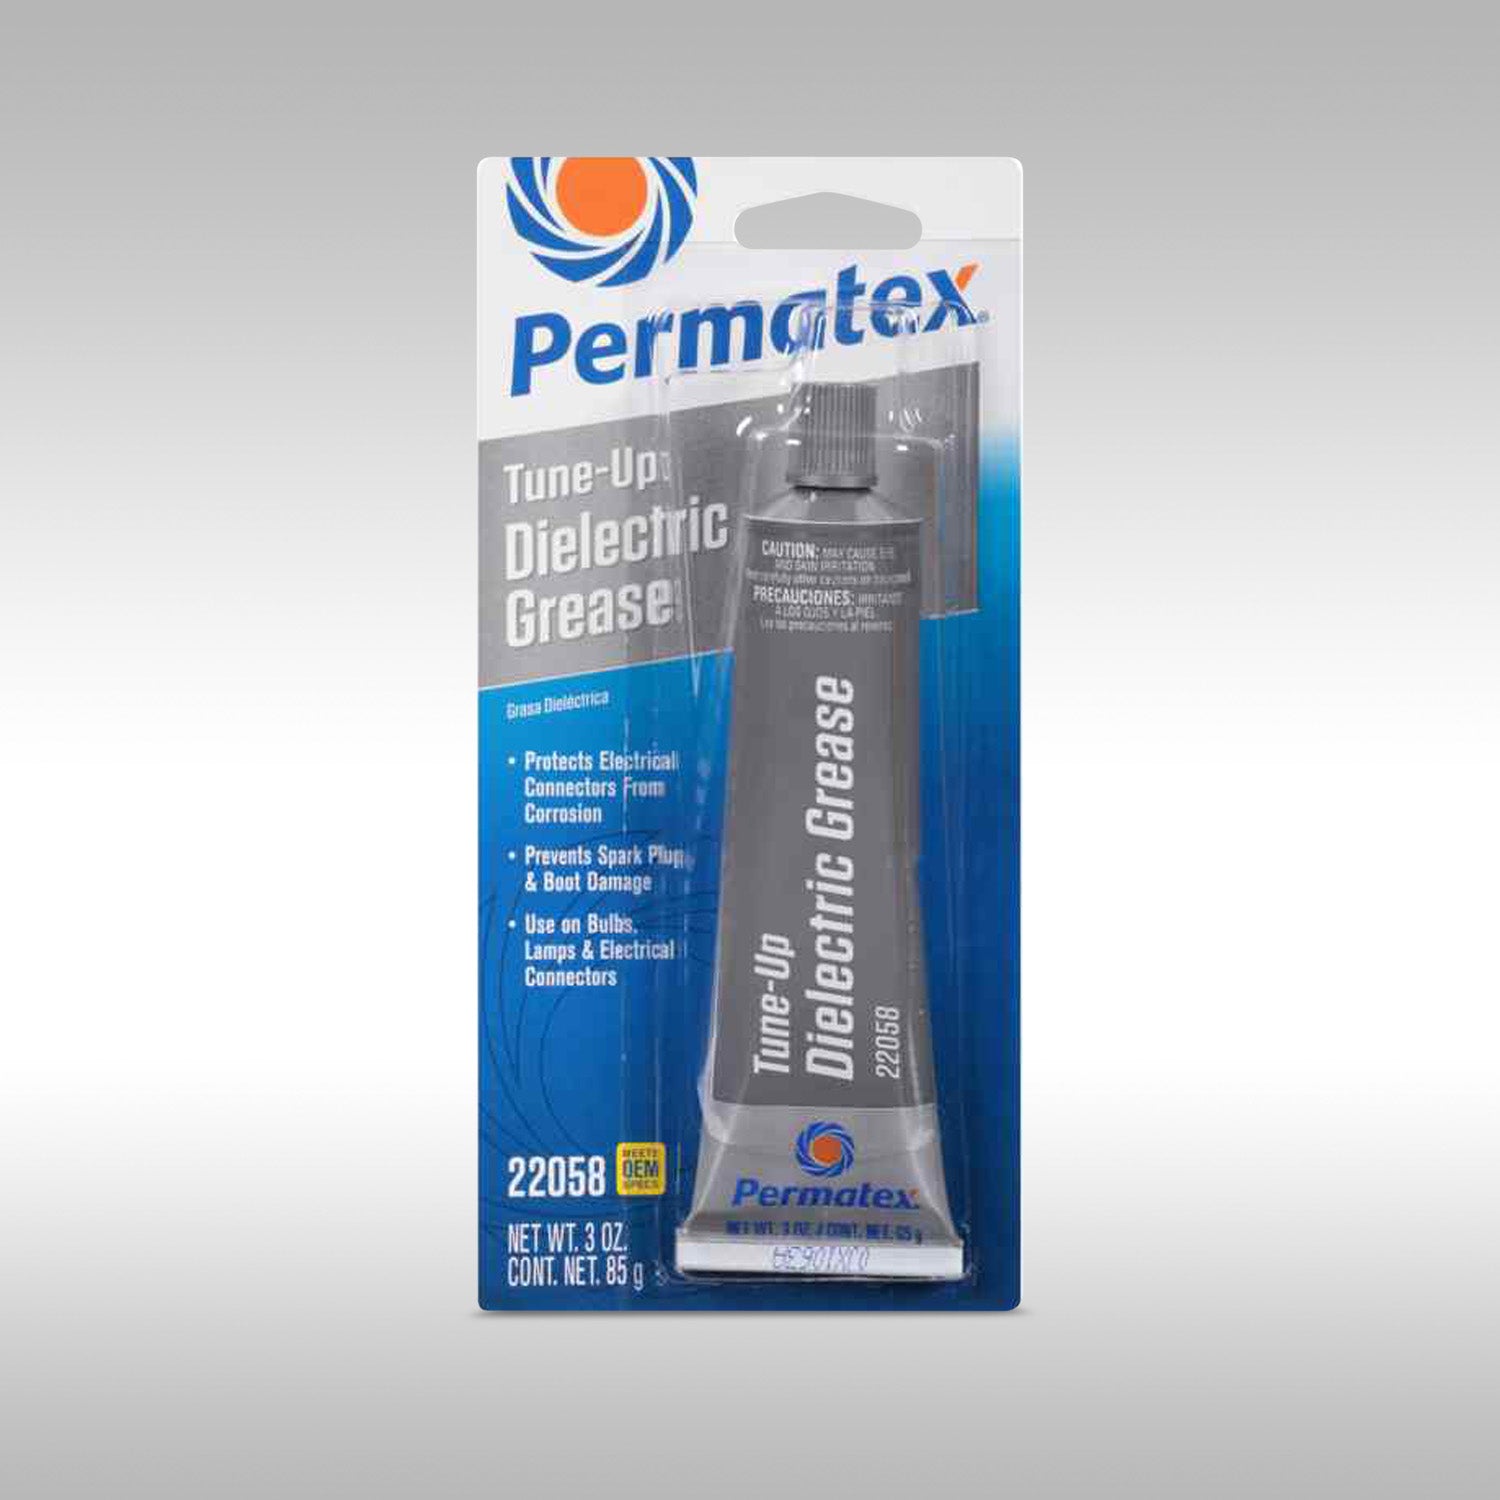 Permatex Dielectric Tune Up Grease protects electrical connections and wiring from salt, dirt and corrosion. Dielectric Tune Up extends the life of bulb sockets and prevents voltage leakage around any electrical connection. Also prevents spark plugs from fusing to boots.